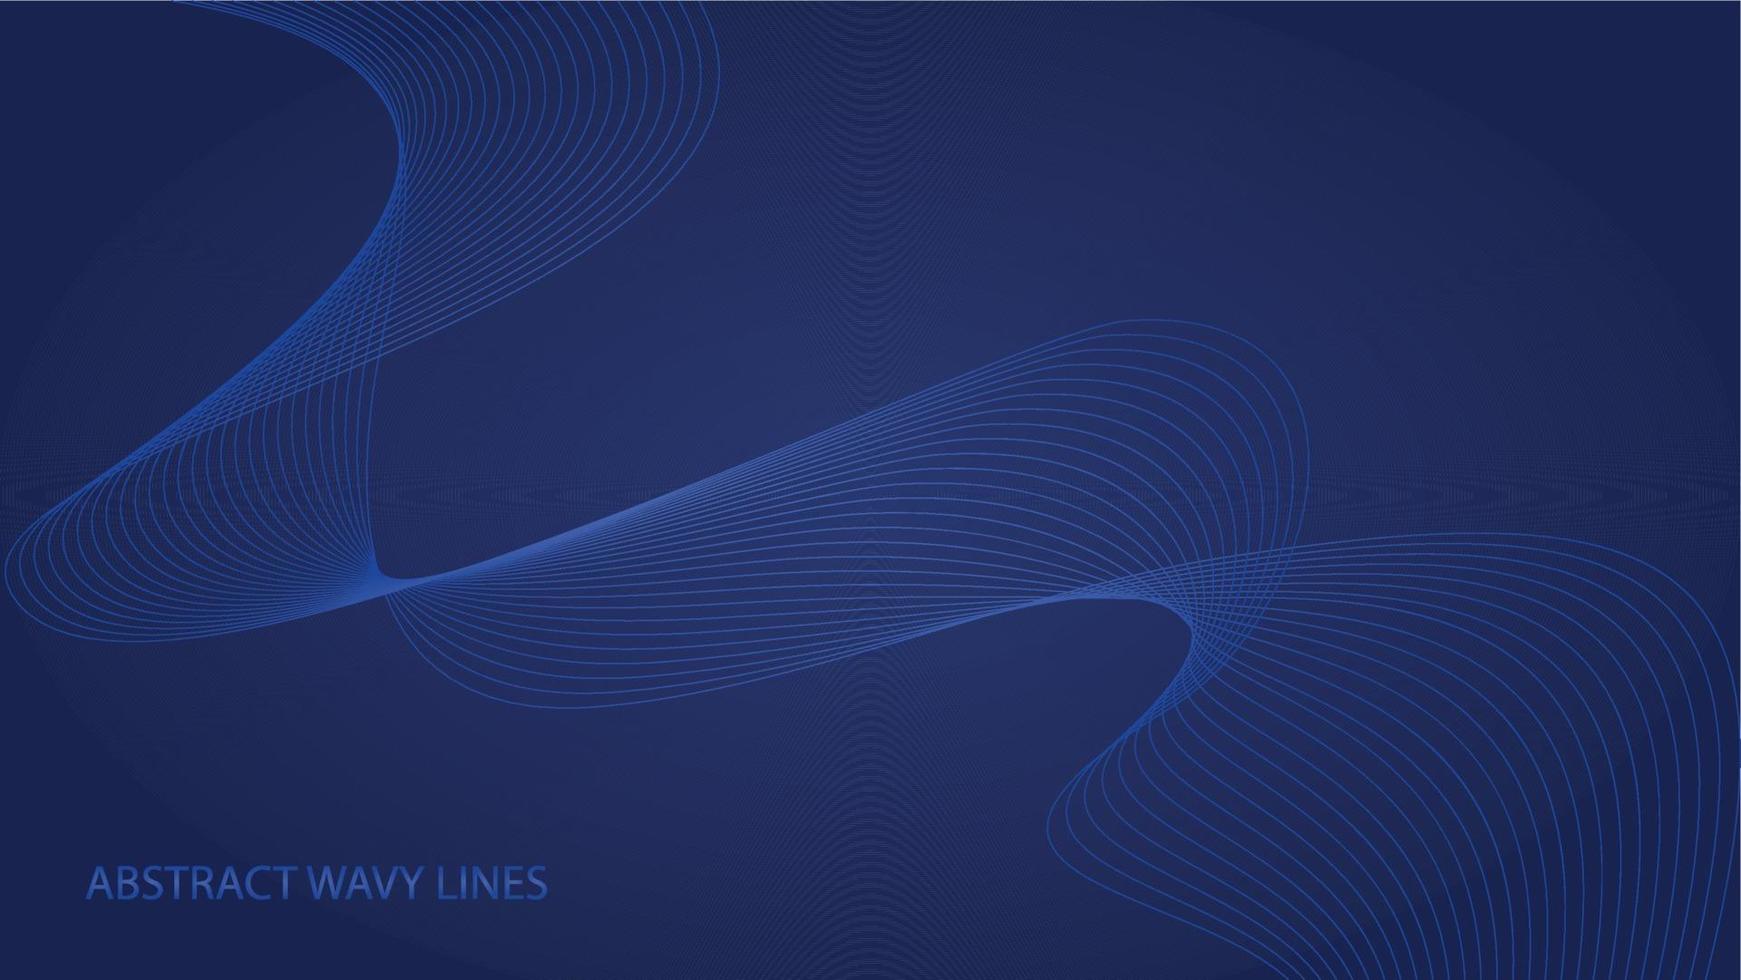 Abstract elegant blue background with flowing line waves vector